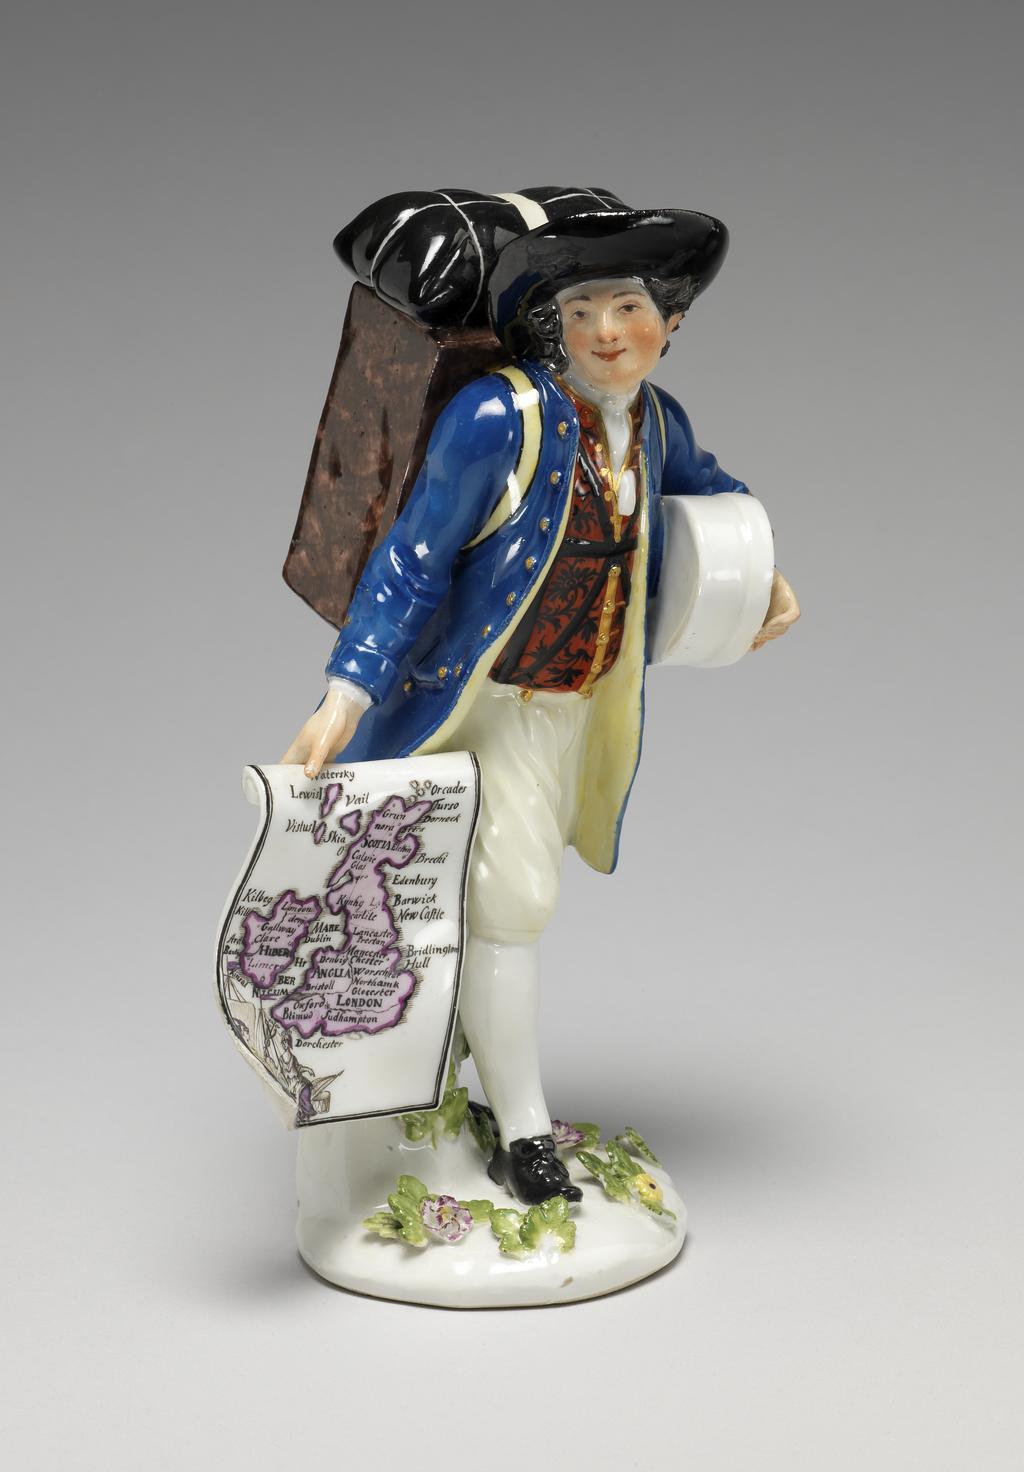 An image of A map-seller. Meissen Porcelain Manufactory, Saxony. With his right hand he holds out a map of the British Isles, in the lower proper right corner figures of Mercury and Britiannia with a bale of merchandize. Under his left arm he carries a white band box. On his back, slung from his shoulders by yellow straps, he carries a mottled-brown cabinet with nine drawers, on top of which is a black hold-all secured by a broad cream-coloured strap. Hard-paste porcelain, press-moulded, glazed, and painted in enamels and gilt, height, whole, 16.9 cm, width, 10 cm, circa 1750-1755. After a model of 1744. Production Note: This model was based on the first print of the third set of Etudes prises dans le bas peuple ou les Cris de Paris, issued in 1738, engraved by the comte de Caylus (1692-1765) after drawings by Edmé Bouchardon (1689-1762) . It is smaller than the first figure modelled after this engraving in 1744. Unusually, the map seller holds a map of the British Isles.